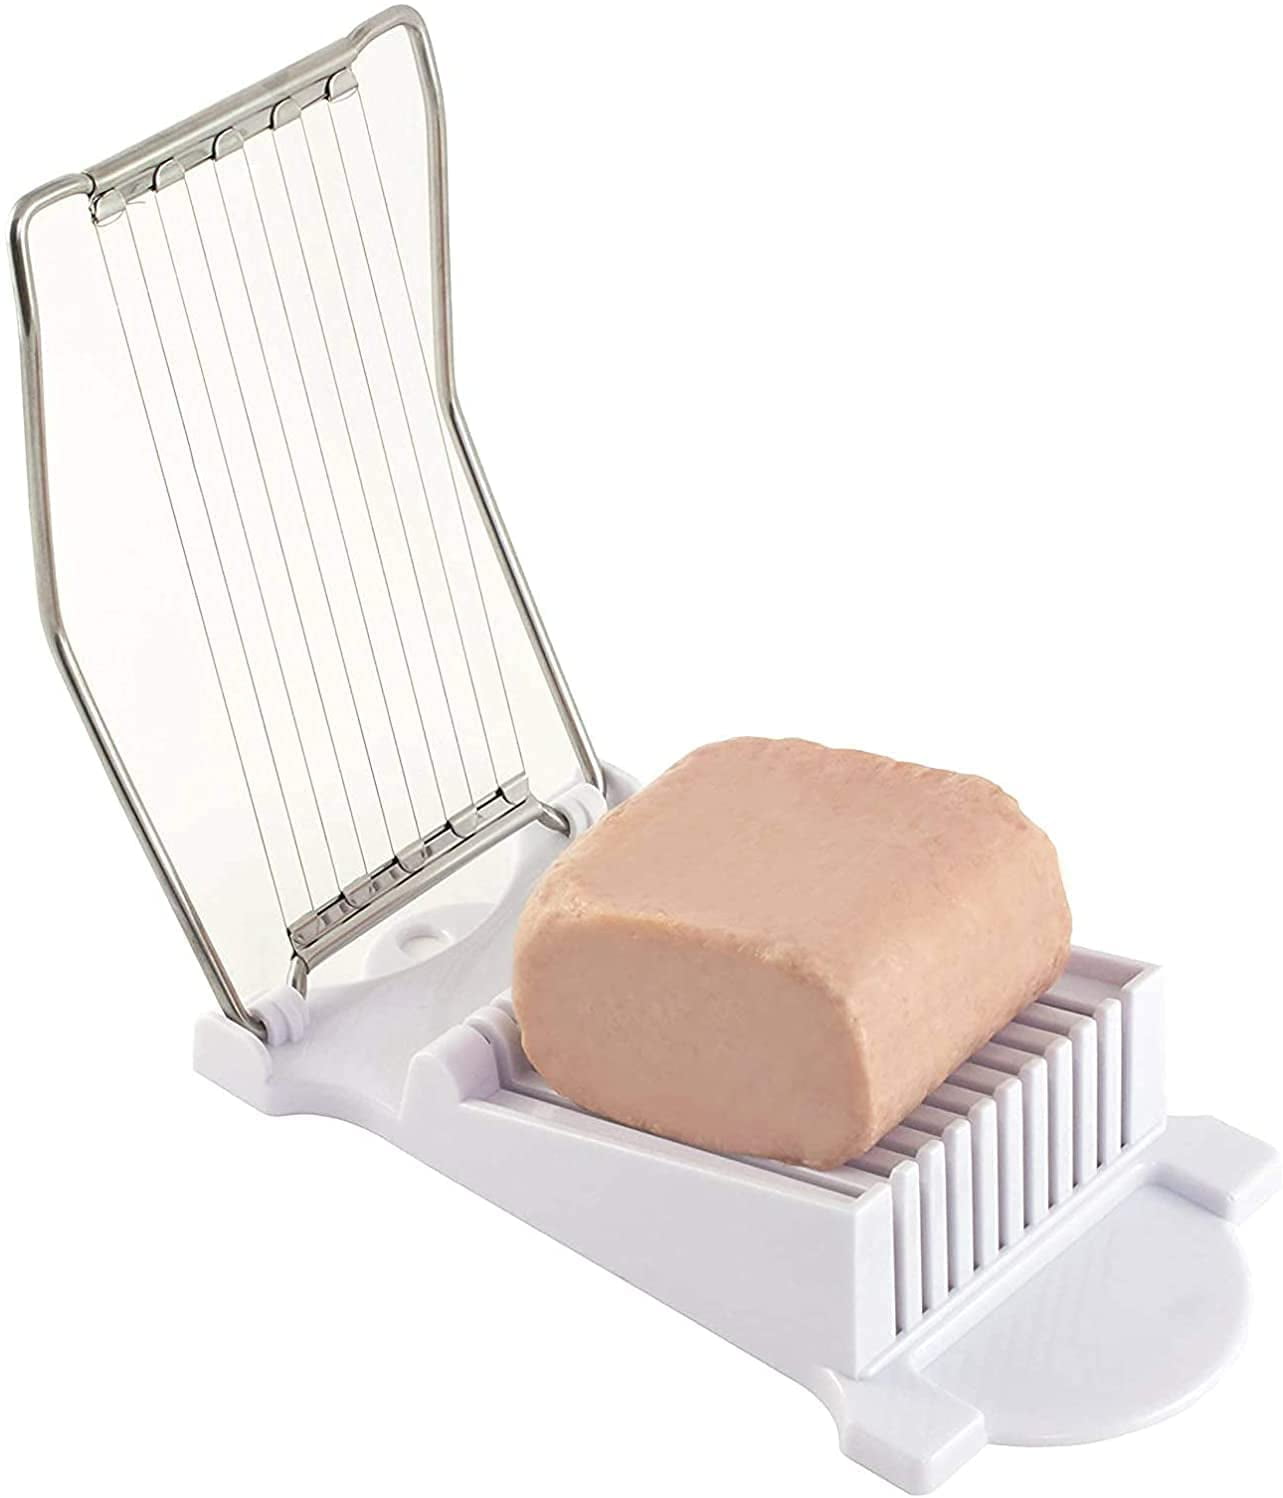 FDA Approved Durable Spam Slicer BPA Free Quality Stainless Steel 11 Wires